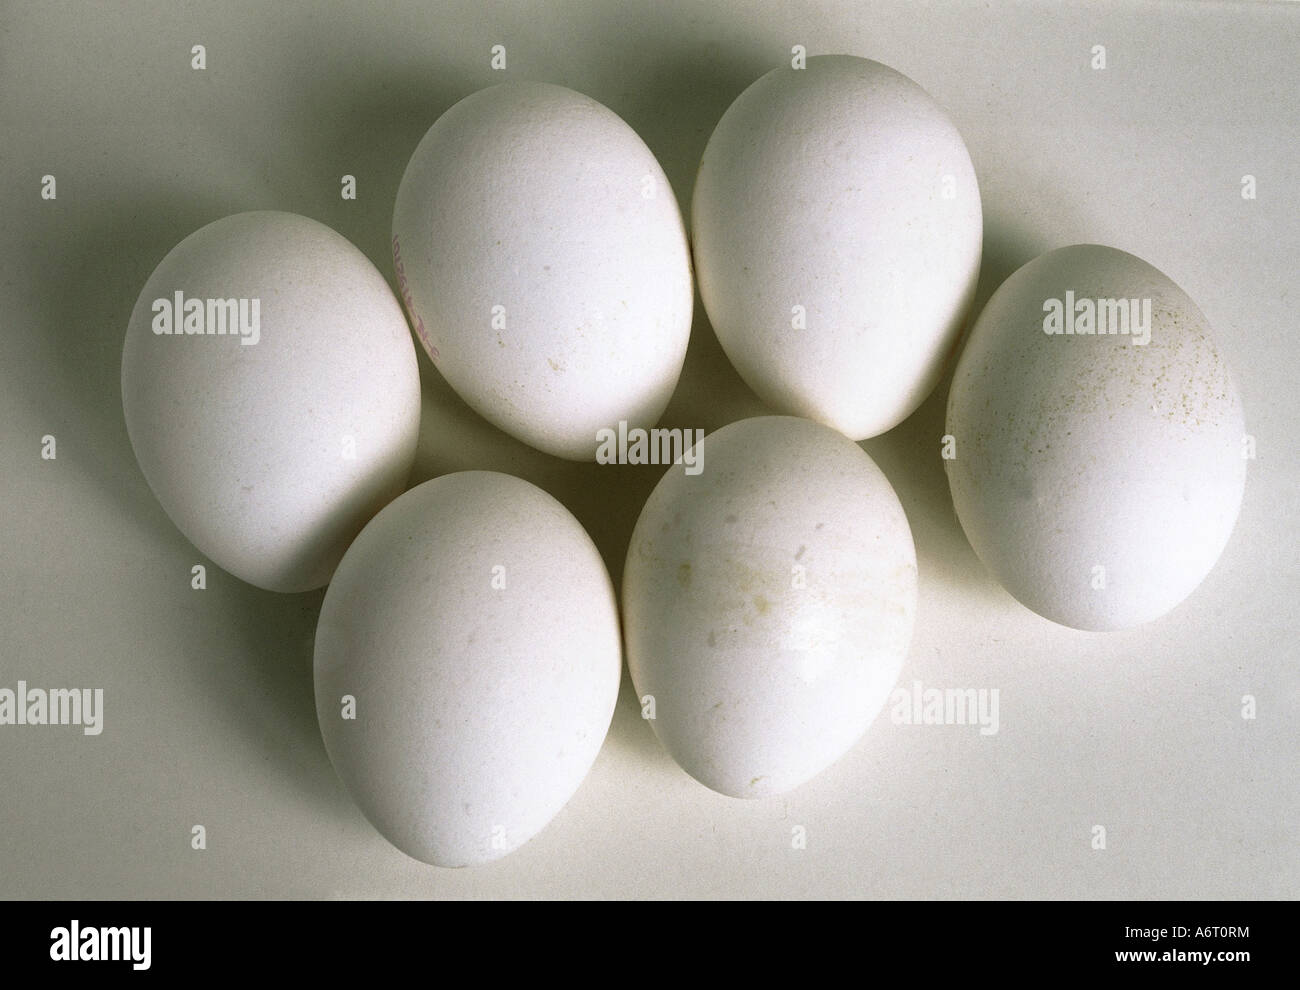 food and beverages, eggs, several white hen's eggs, egg, biomaterials, Stock Photo